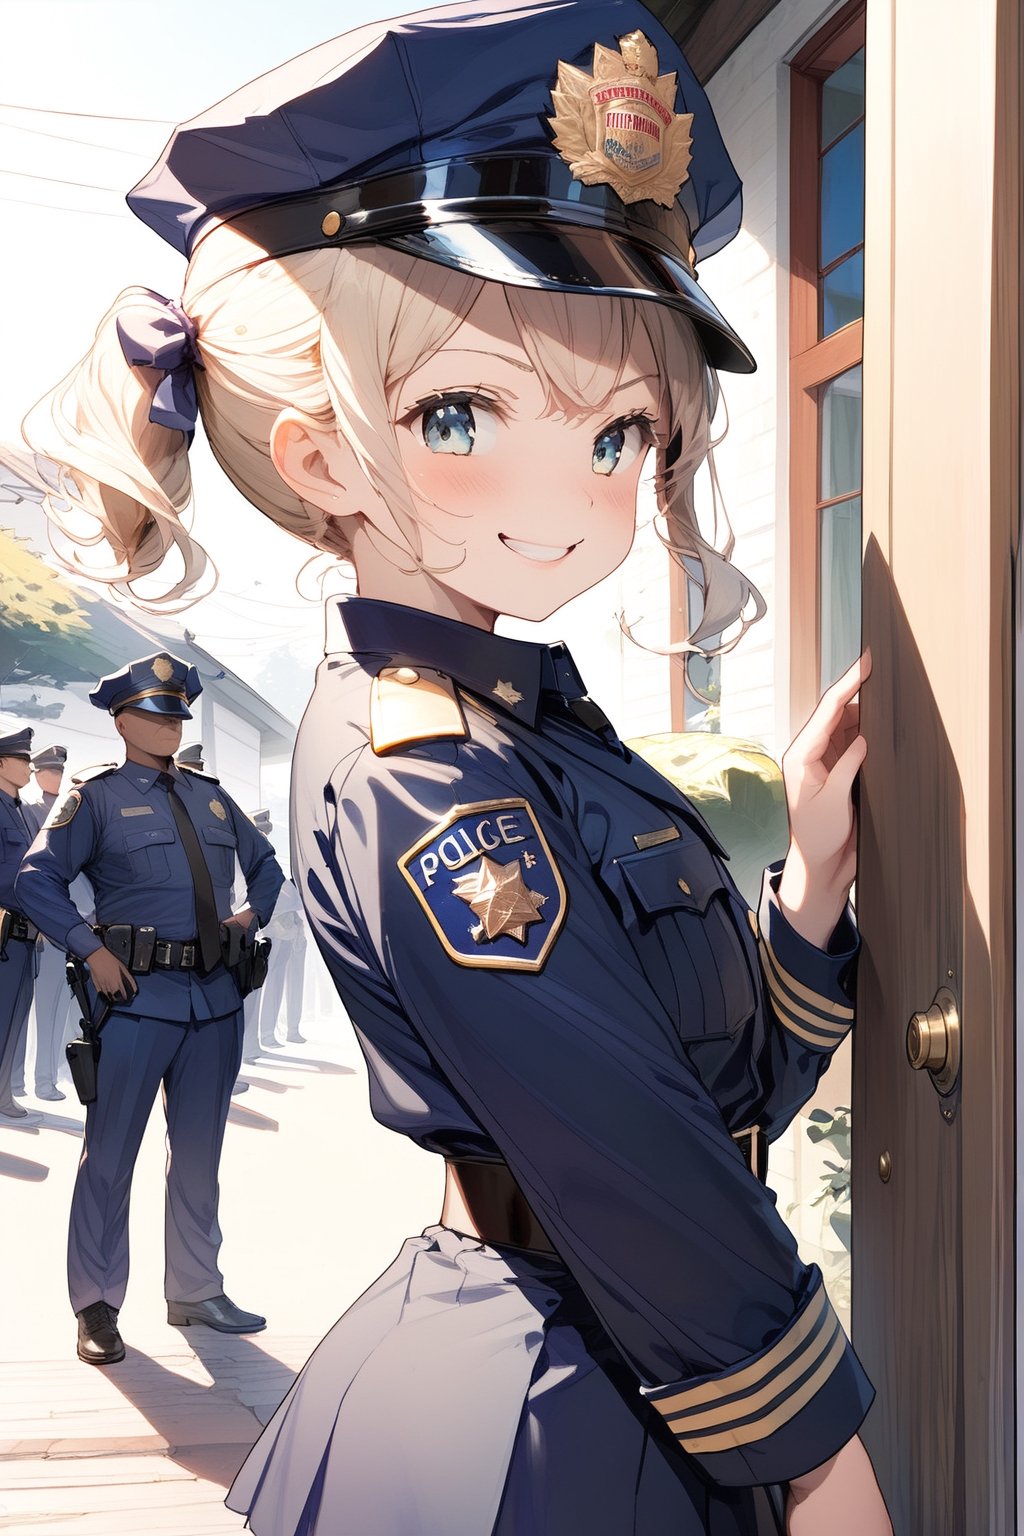 //quality, (masterpiece:1.3), (detailed), ((,best quality,)),//1girl,(loli:1.4),child,//,blonde_hair,sidelocks,(twin drills:1.4),detailed eyes,colorful eyes,//,(Text "FBI" uniform :1.4),(police_uniform:1.4),police_cap,((FBI badges,)),white thighhgihs,//,(smirk:1.2),blush,:3//,profile,from_side,road outside the door,closed_door,wiude_shot,Porch Front,plants,leaf,(,multiple_men,6men,many army polices surrounding the girl:1.4)